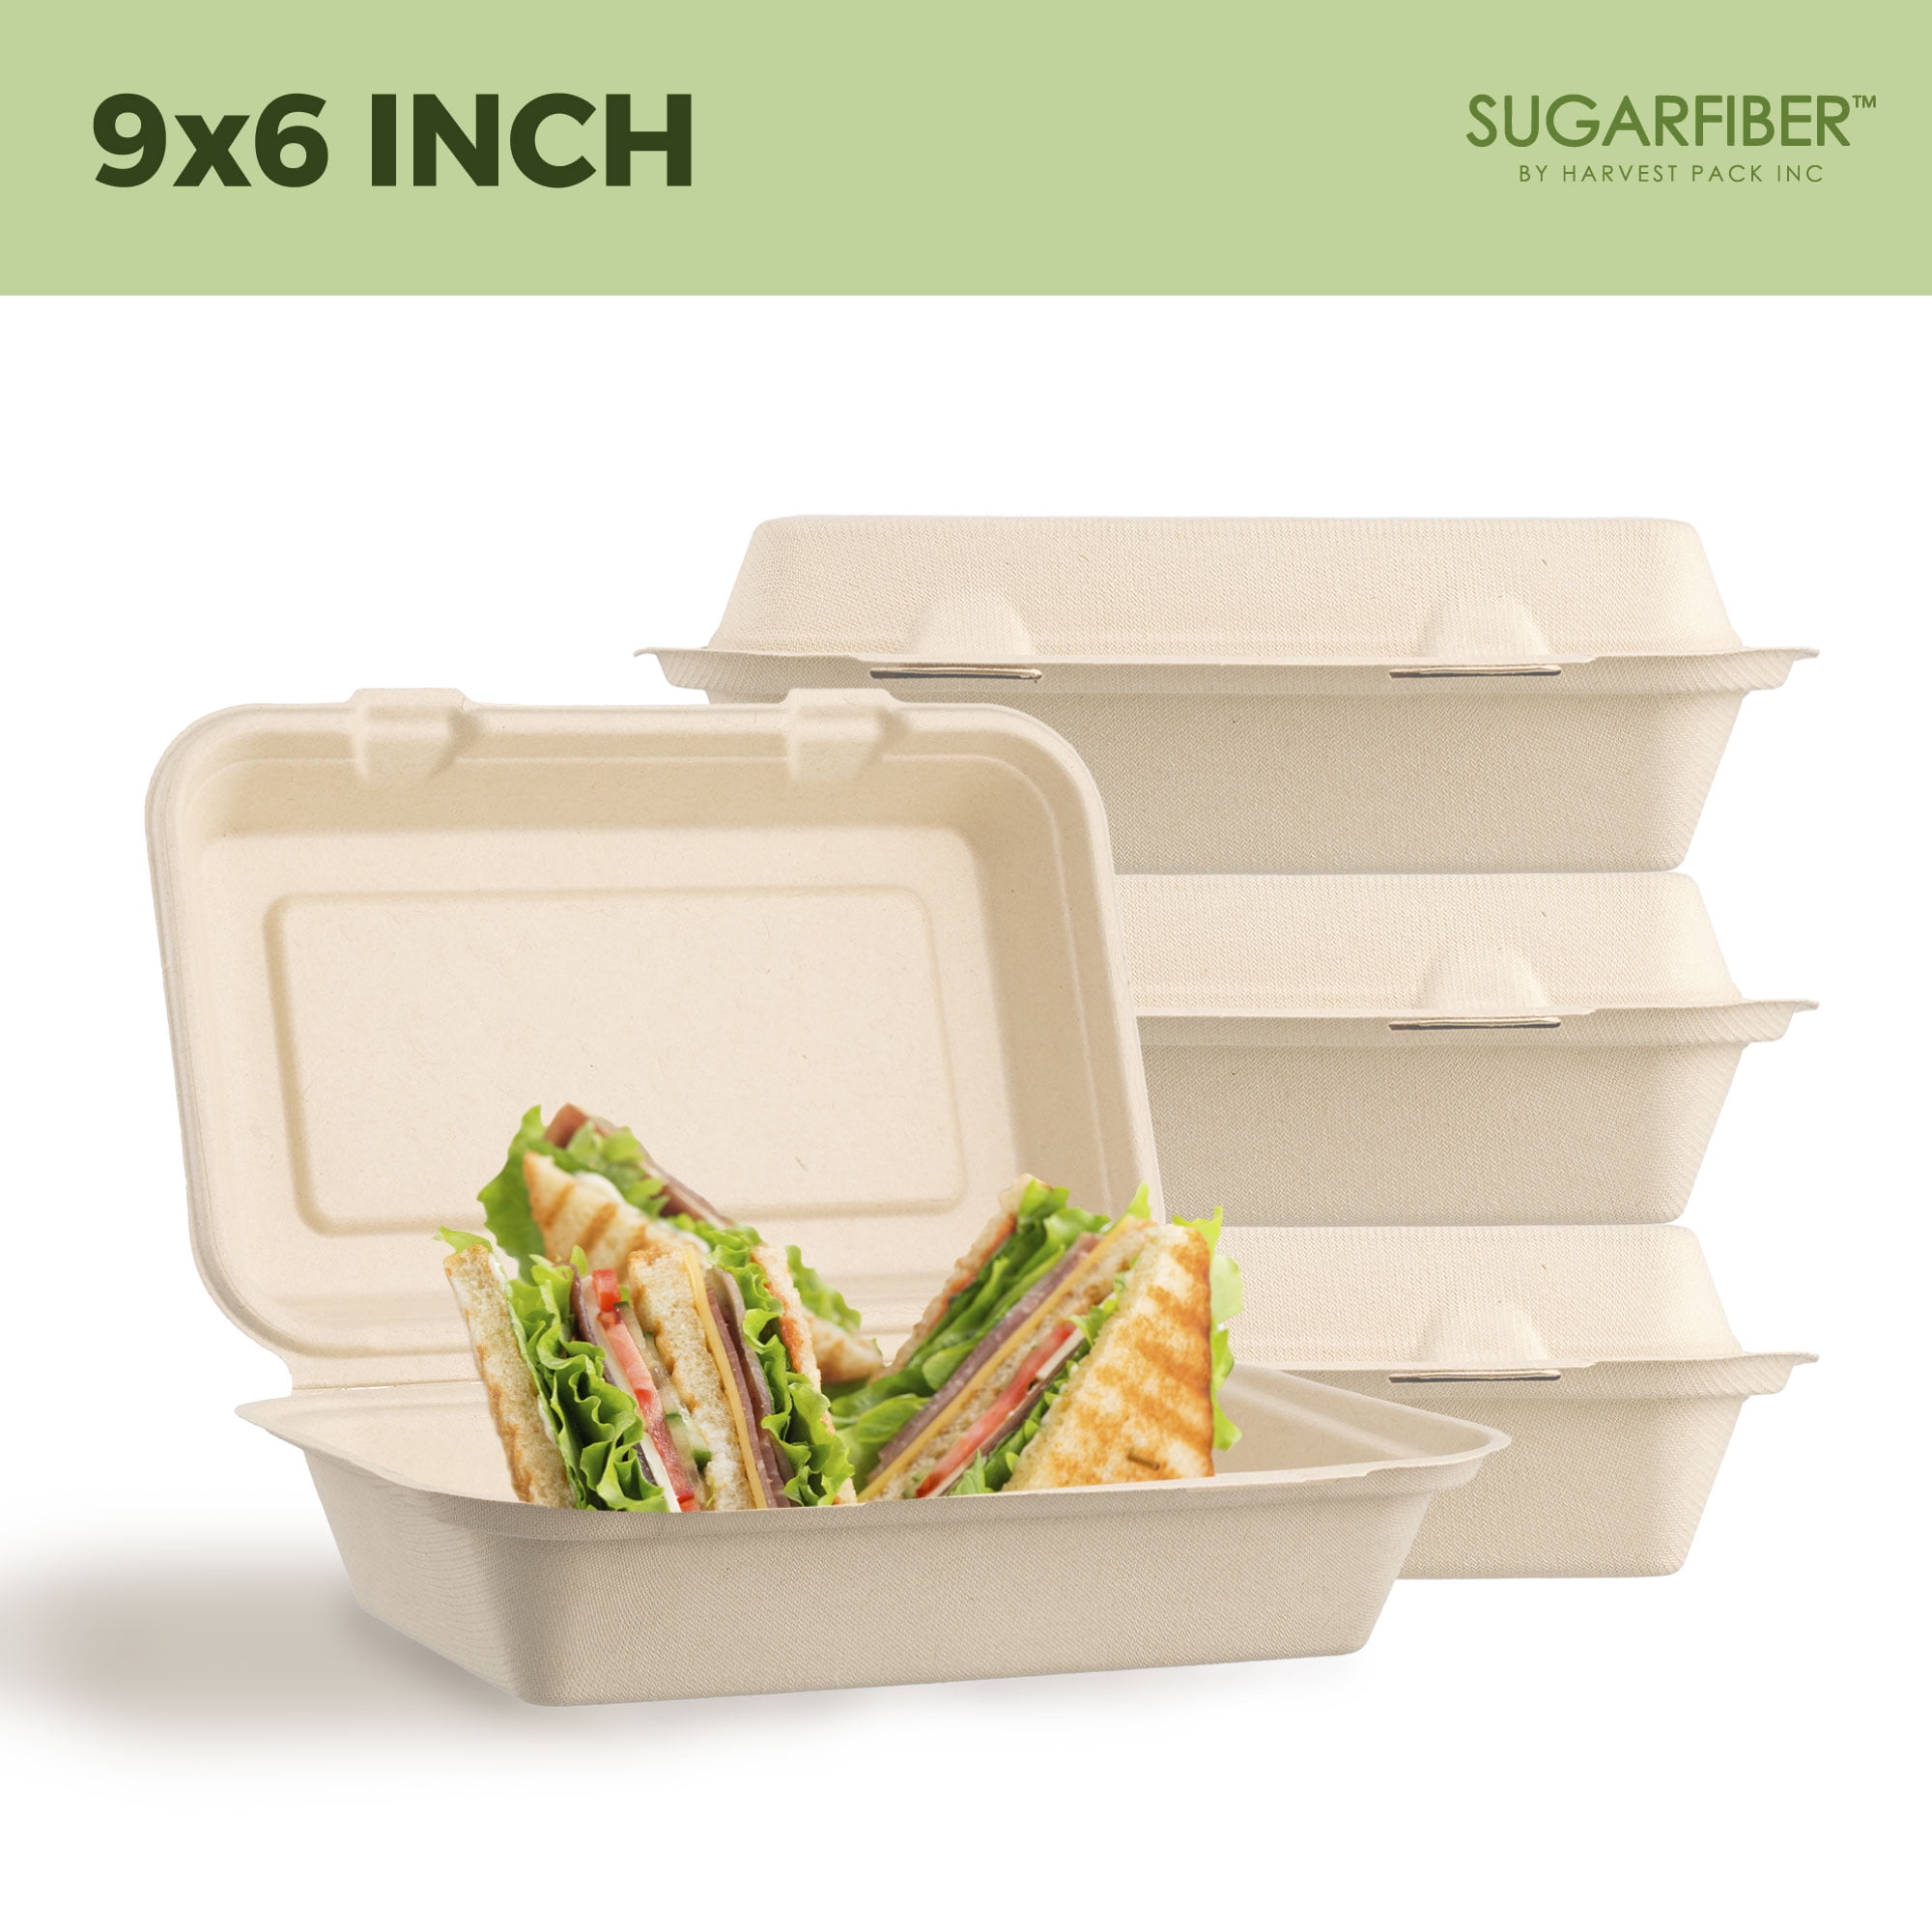 Greenwave Eco-Cane Fiber 6 x 9 Takeout Containers, 200/Case